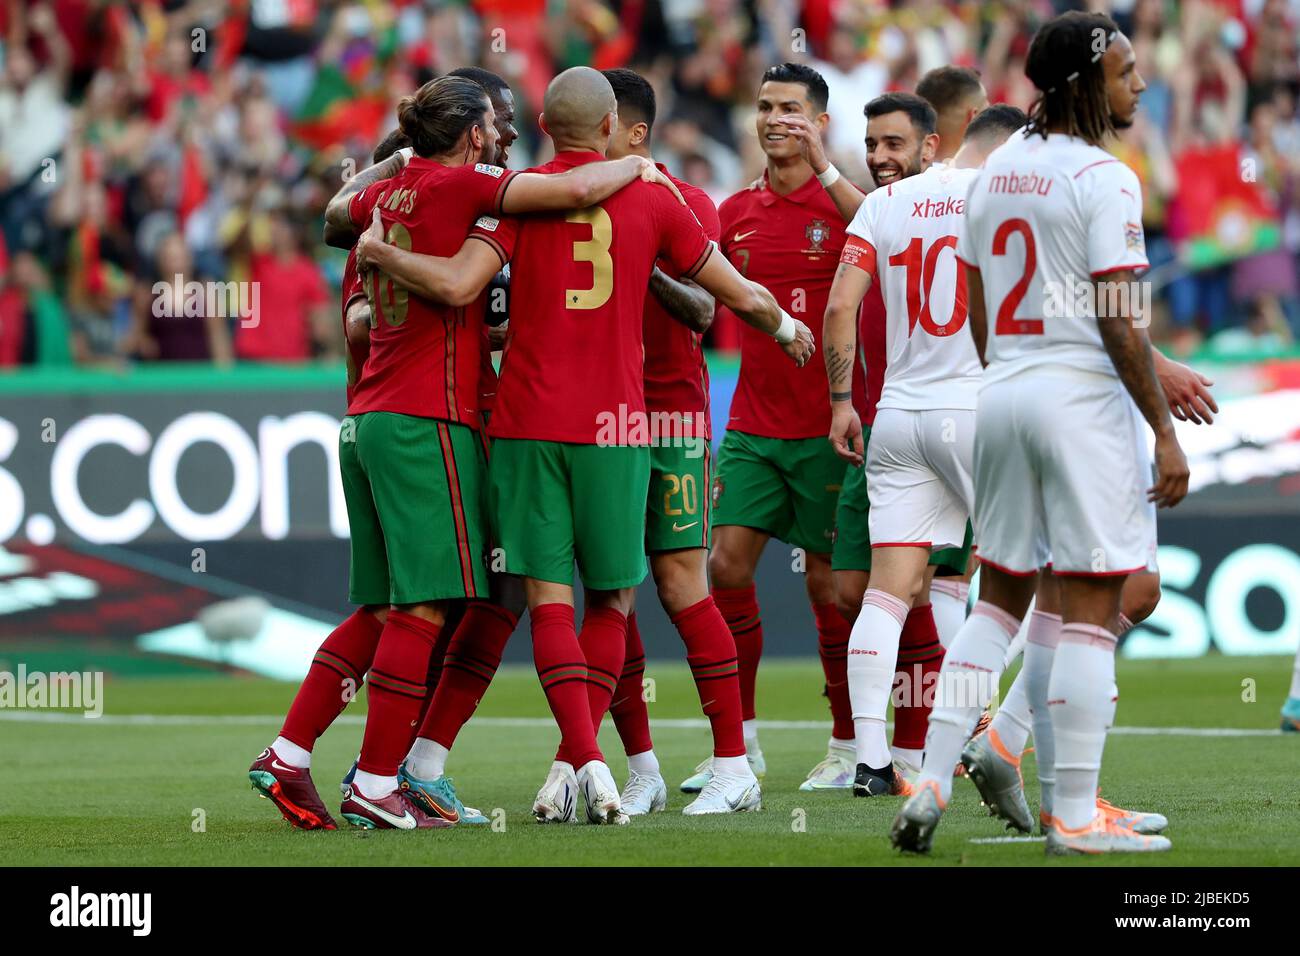 Lisbon, Portugal. 5th June, 2022. Portugal's players celebrate a goal by William Carvalho during the UEFA Nations League football match between Portugal and Switzerland in Lisbon, Portugal, on June 5, 2022. Credit: Pedro Fiuza/Xinhua/Alamy Live News Stock Photo